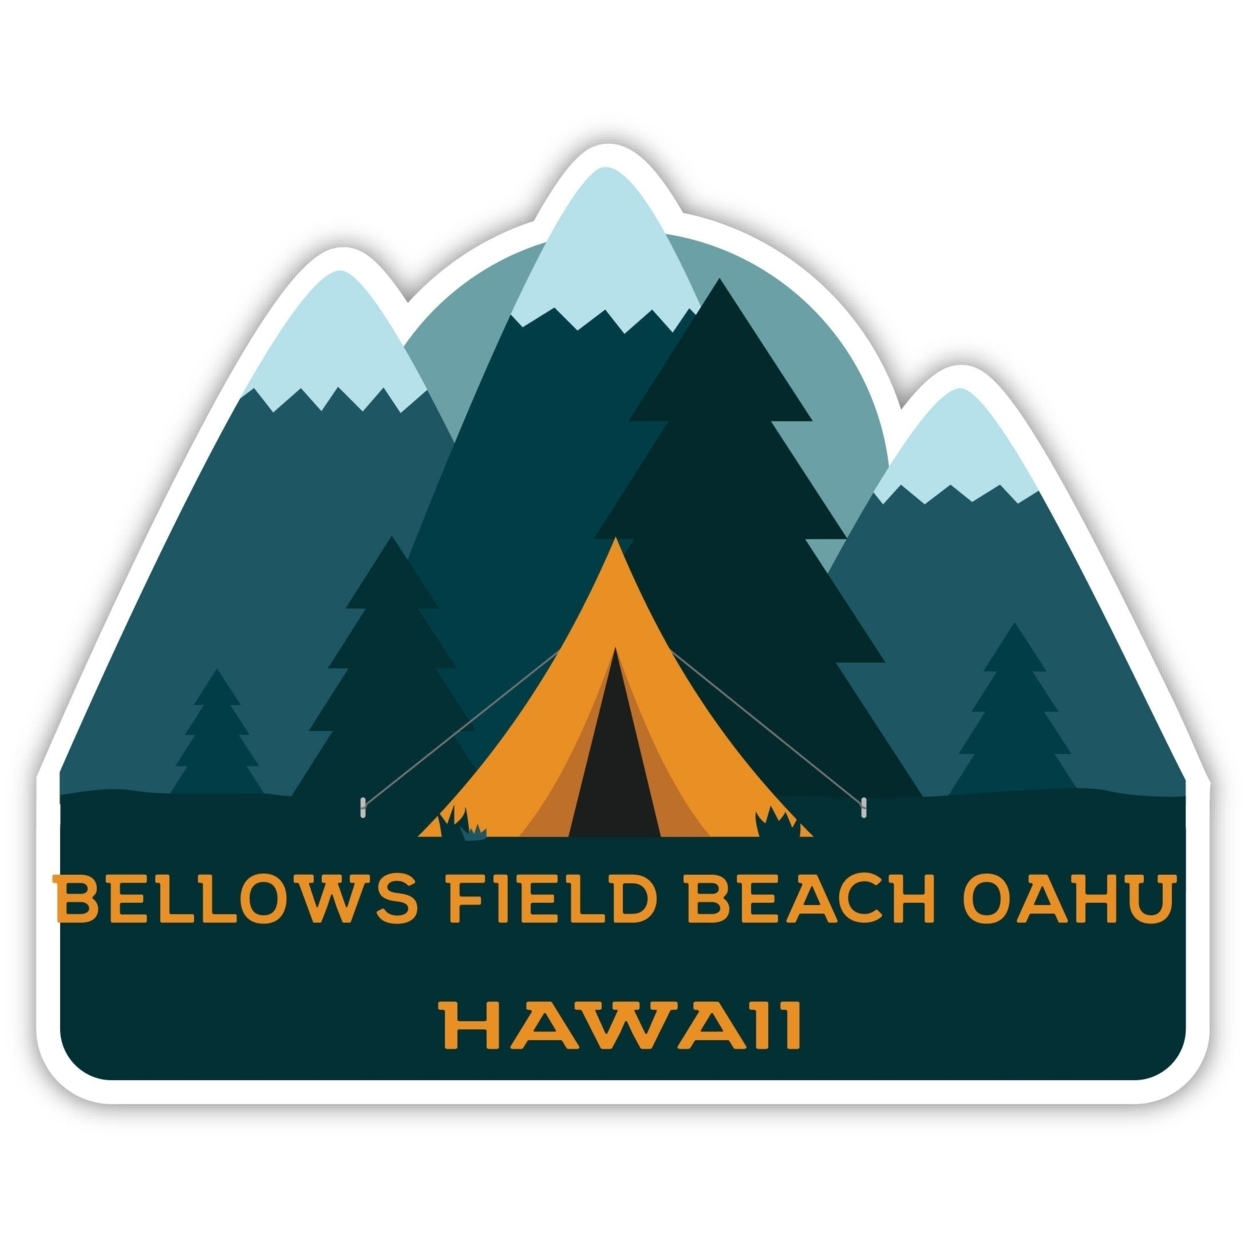 Bellows Field Beach Oahu Hawaii Souvenir Decorative Stickers (Choose Theme And Size) - 4-Pack, 8-Inch, Tent